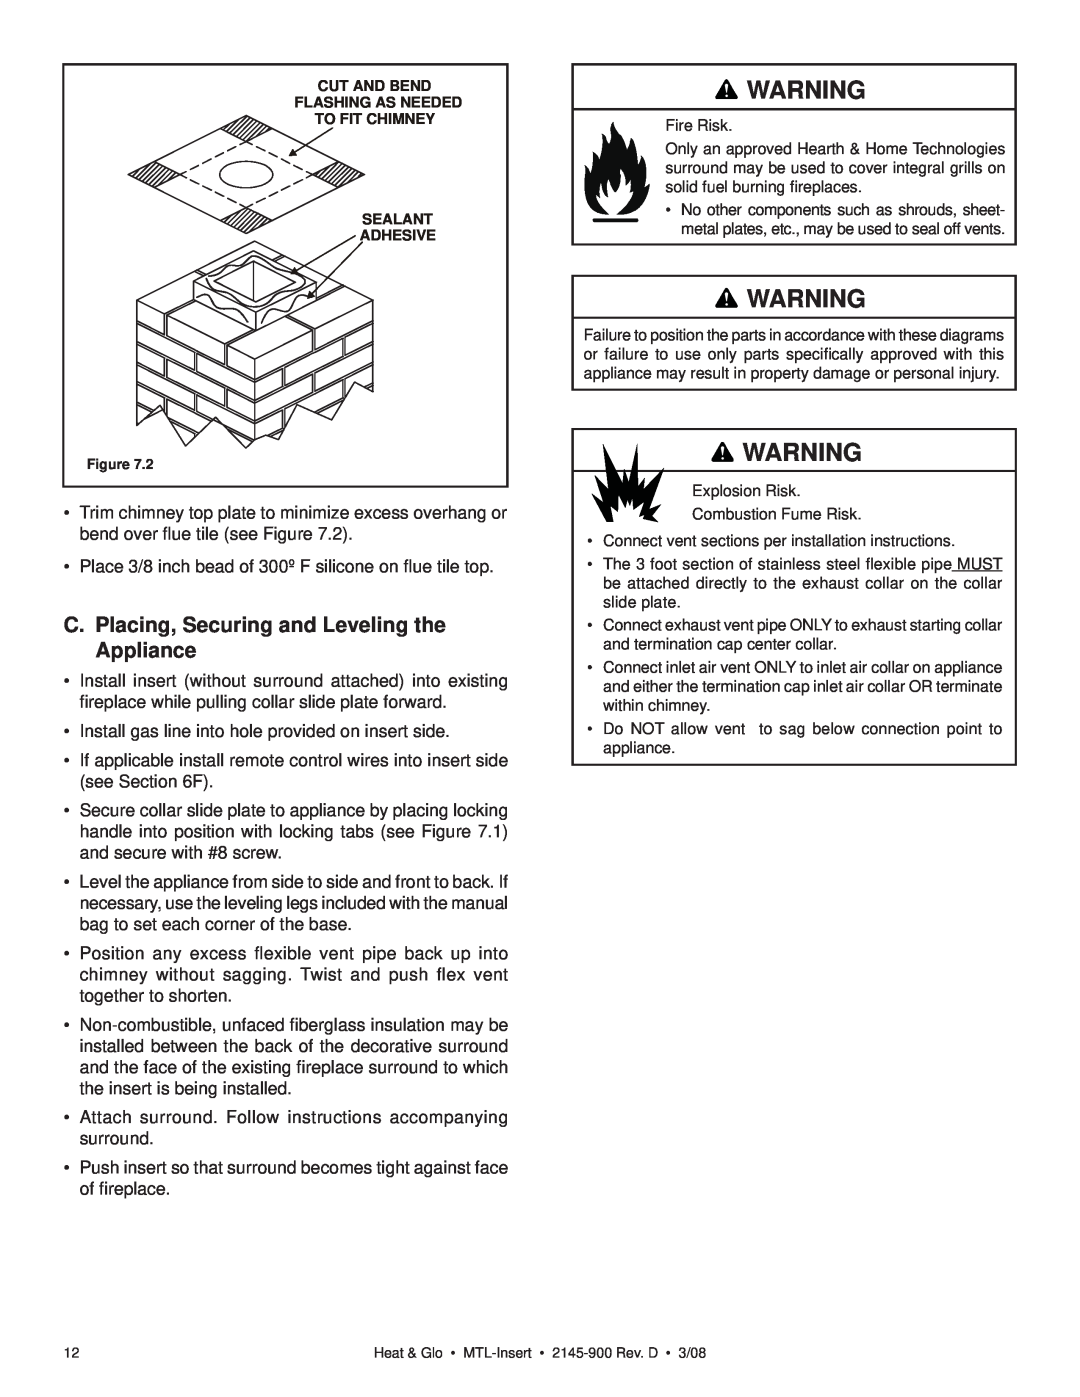 Heat & Glo LifeStyle MTL-INSERT owner manual C.Placing, Securing and Leveling the Appliance 